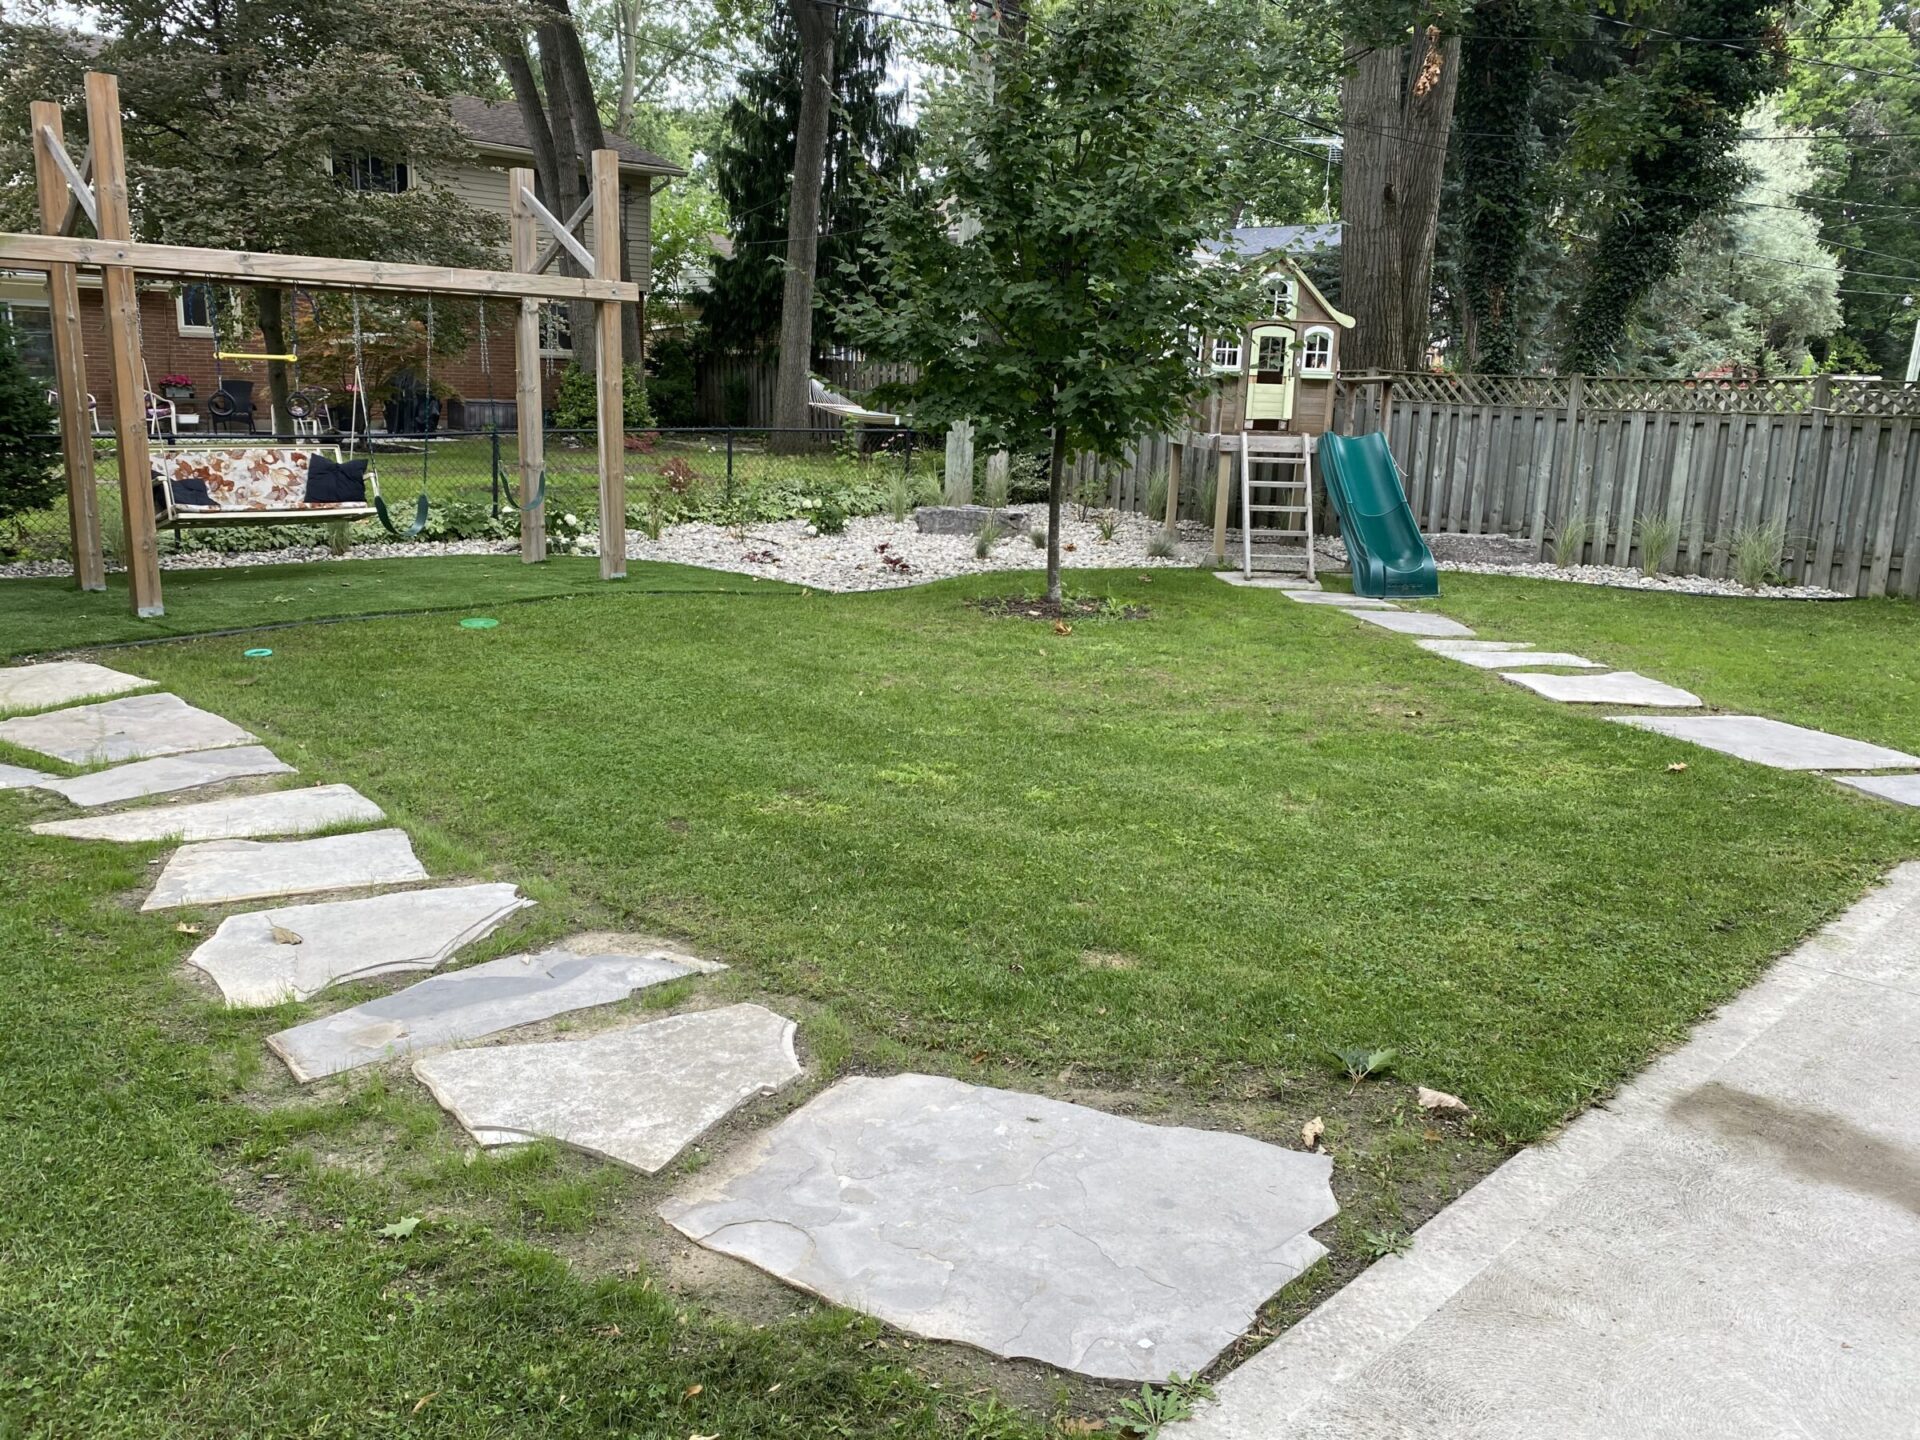 A residential backyard with stone pathway, green grass, a swing set, playhouse, and slide, surrounded by trees and a wooden fence.